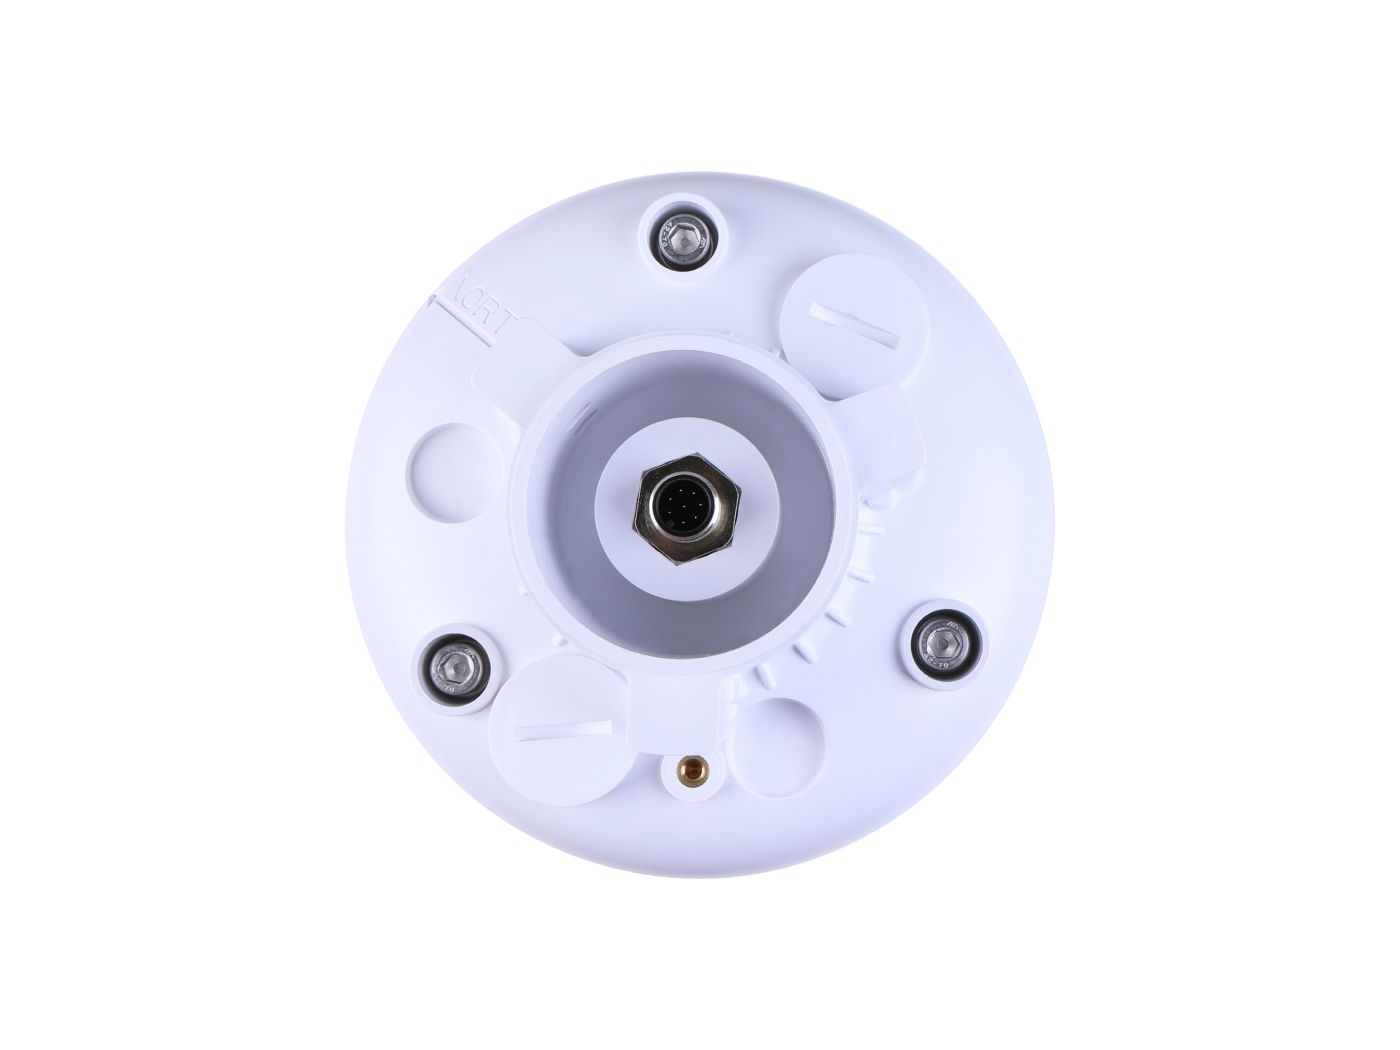 5-in-1 V2 Compact Weather Sensor